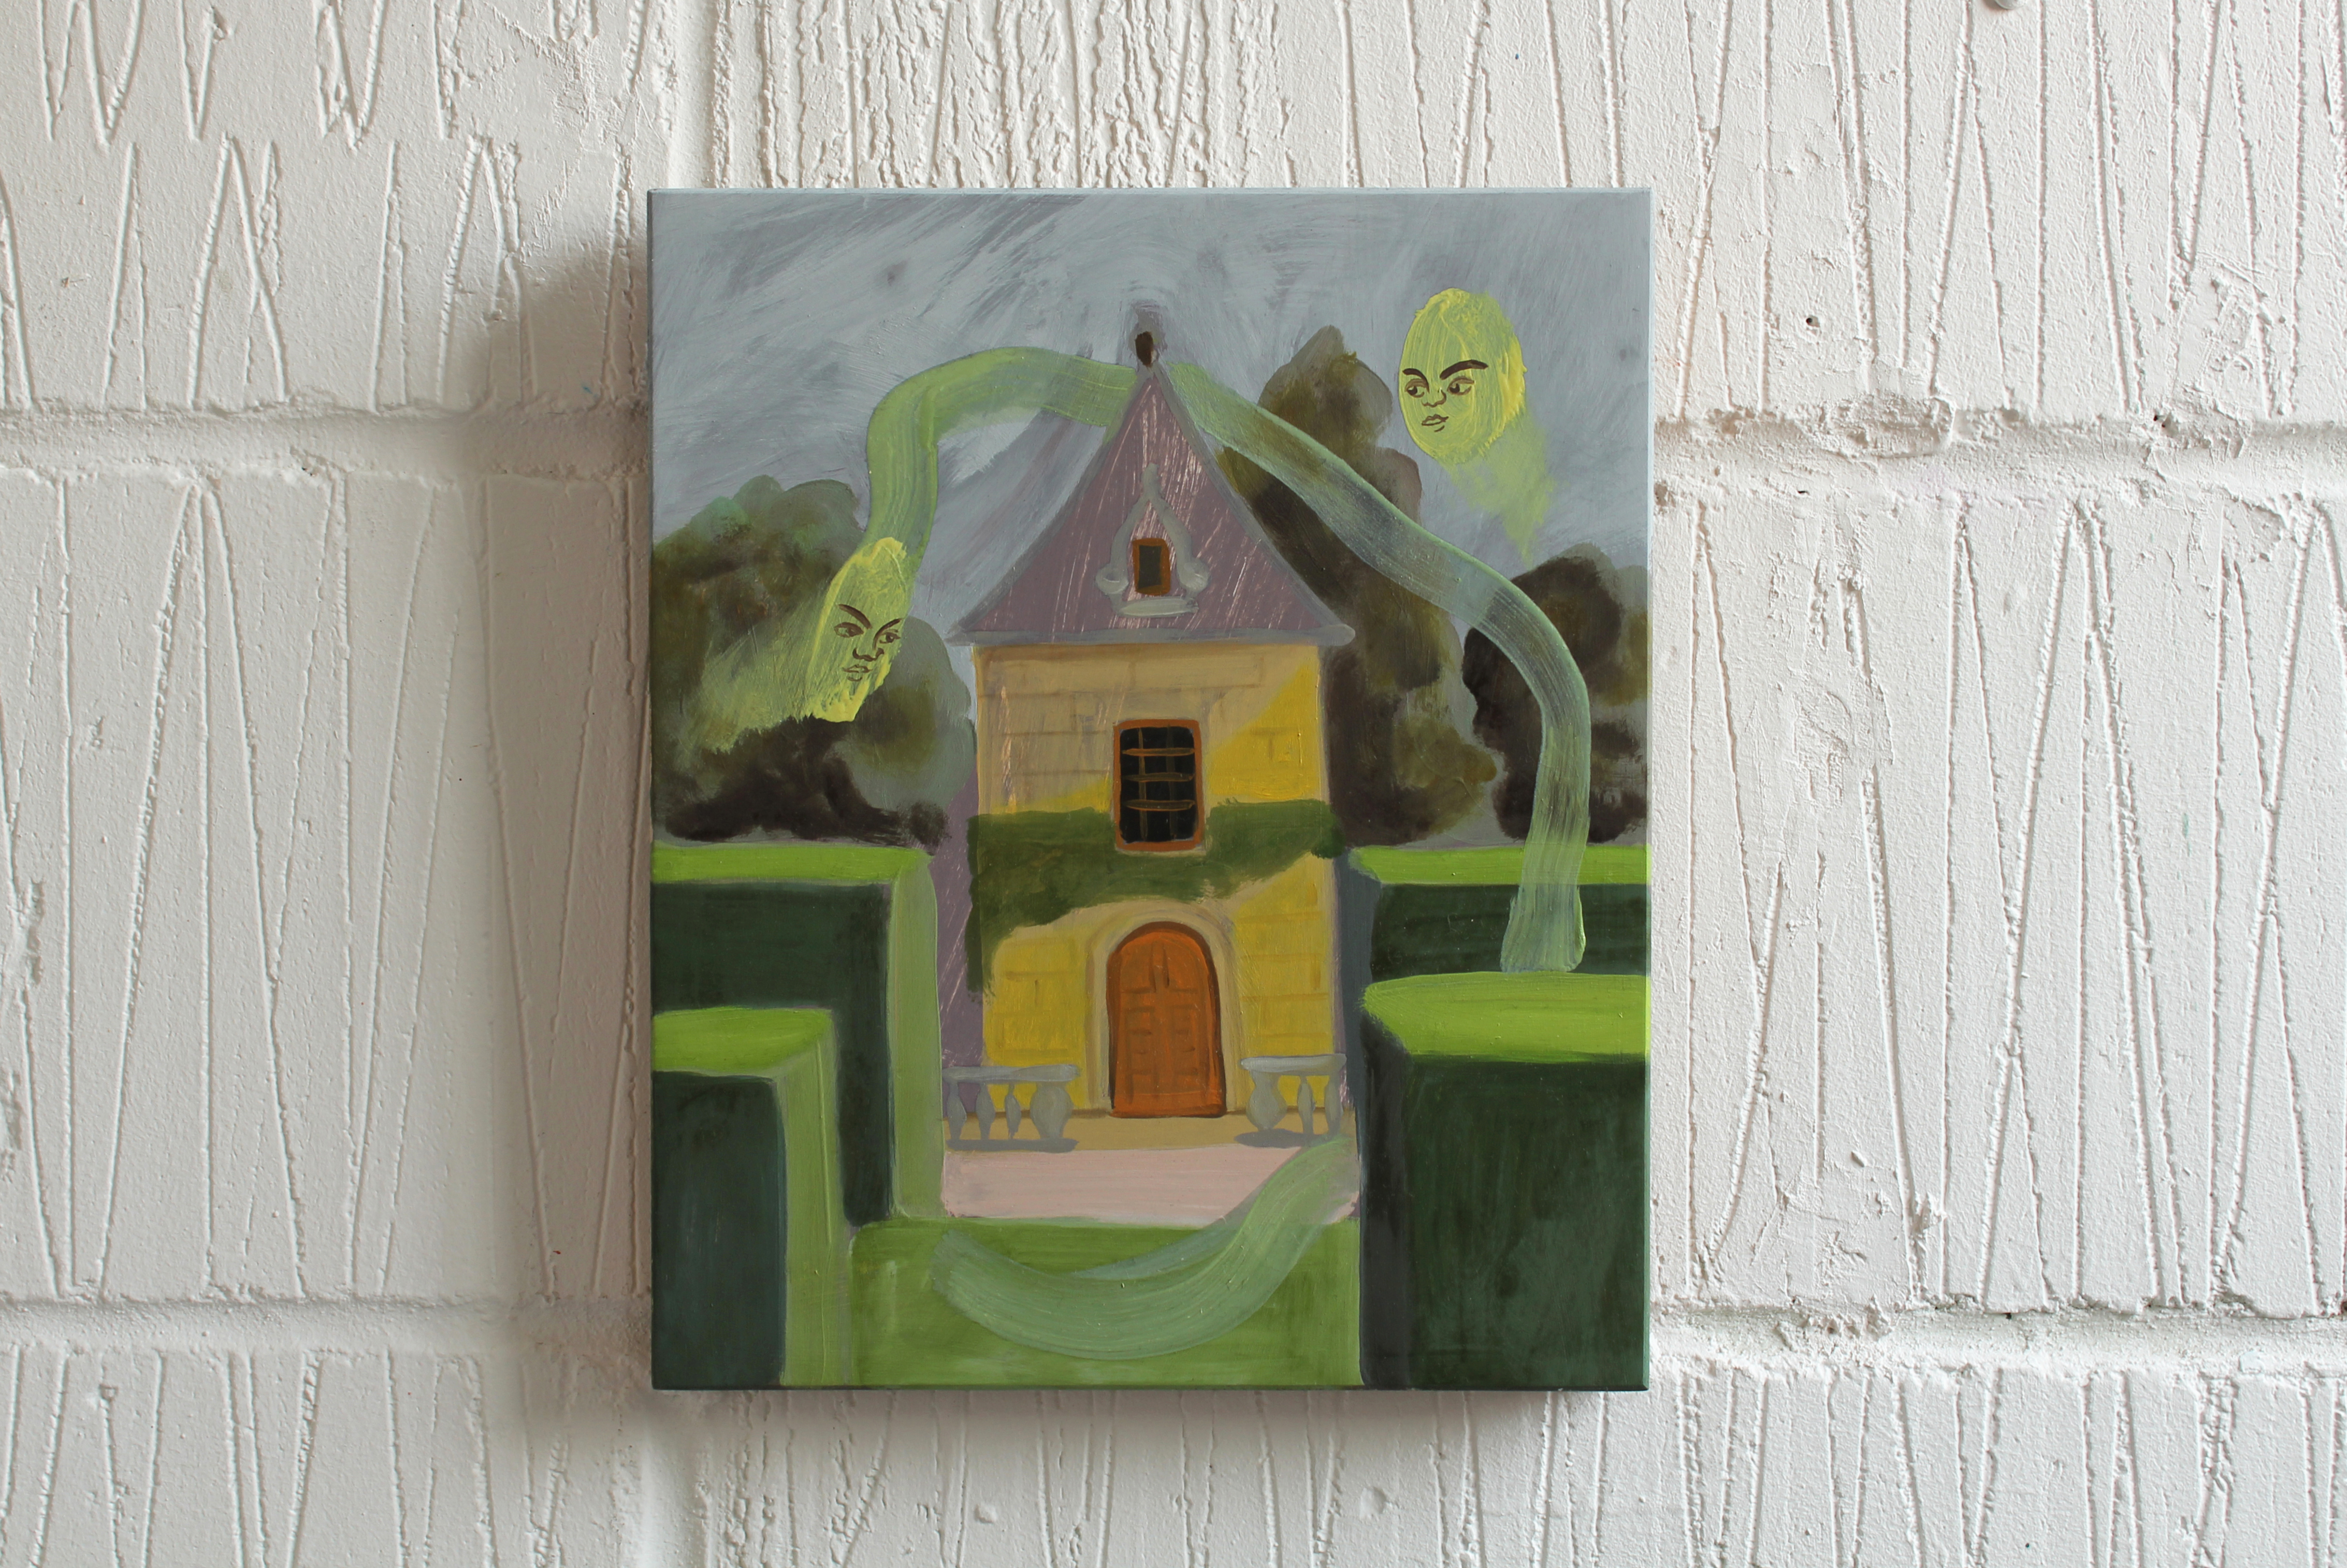 'Cottage 16' on the wall